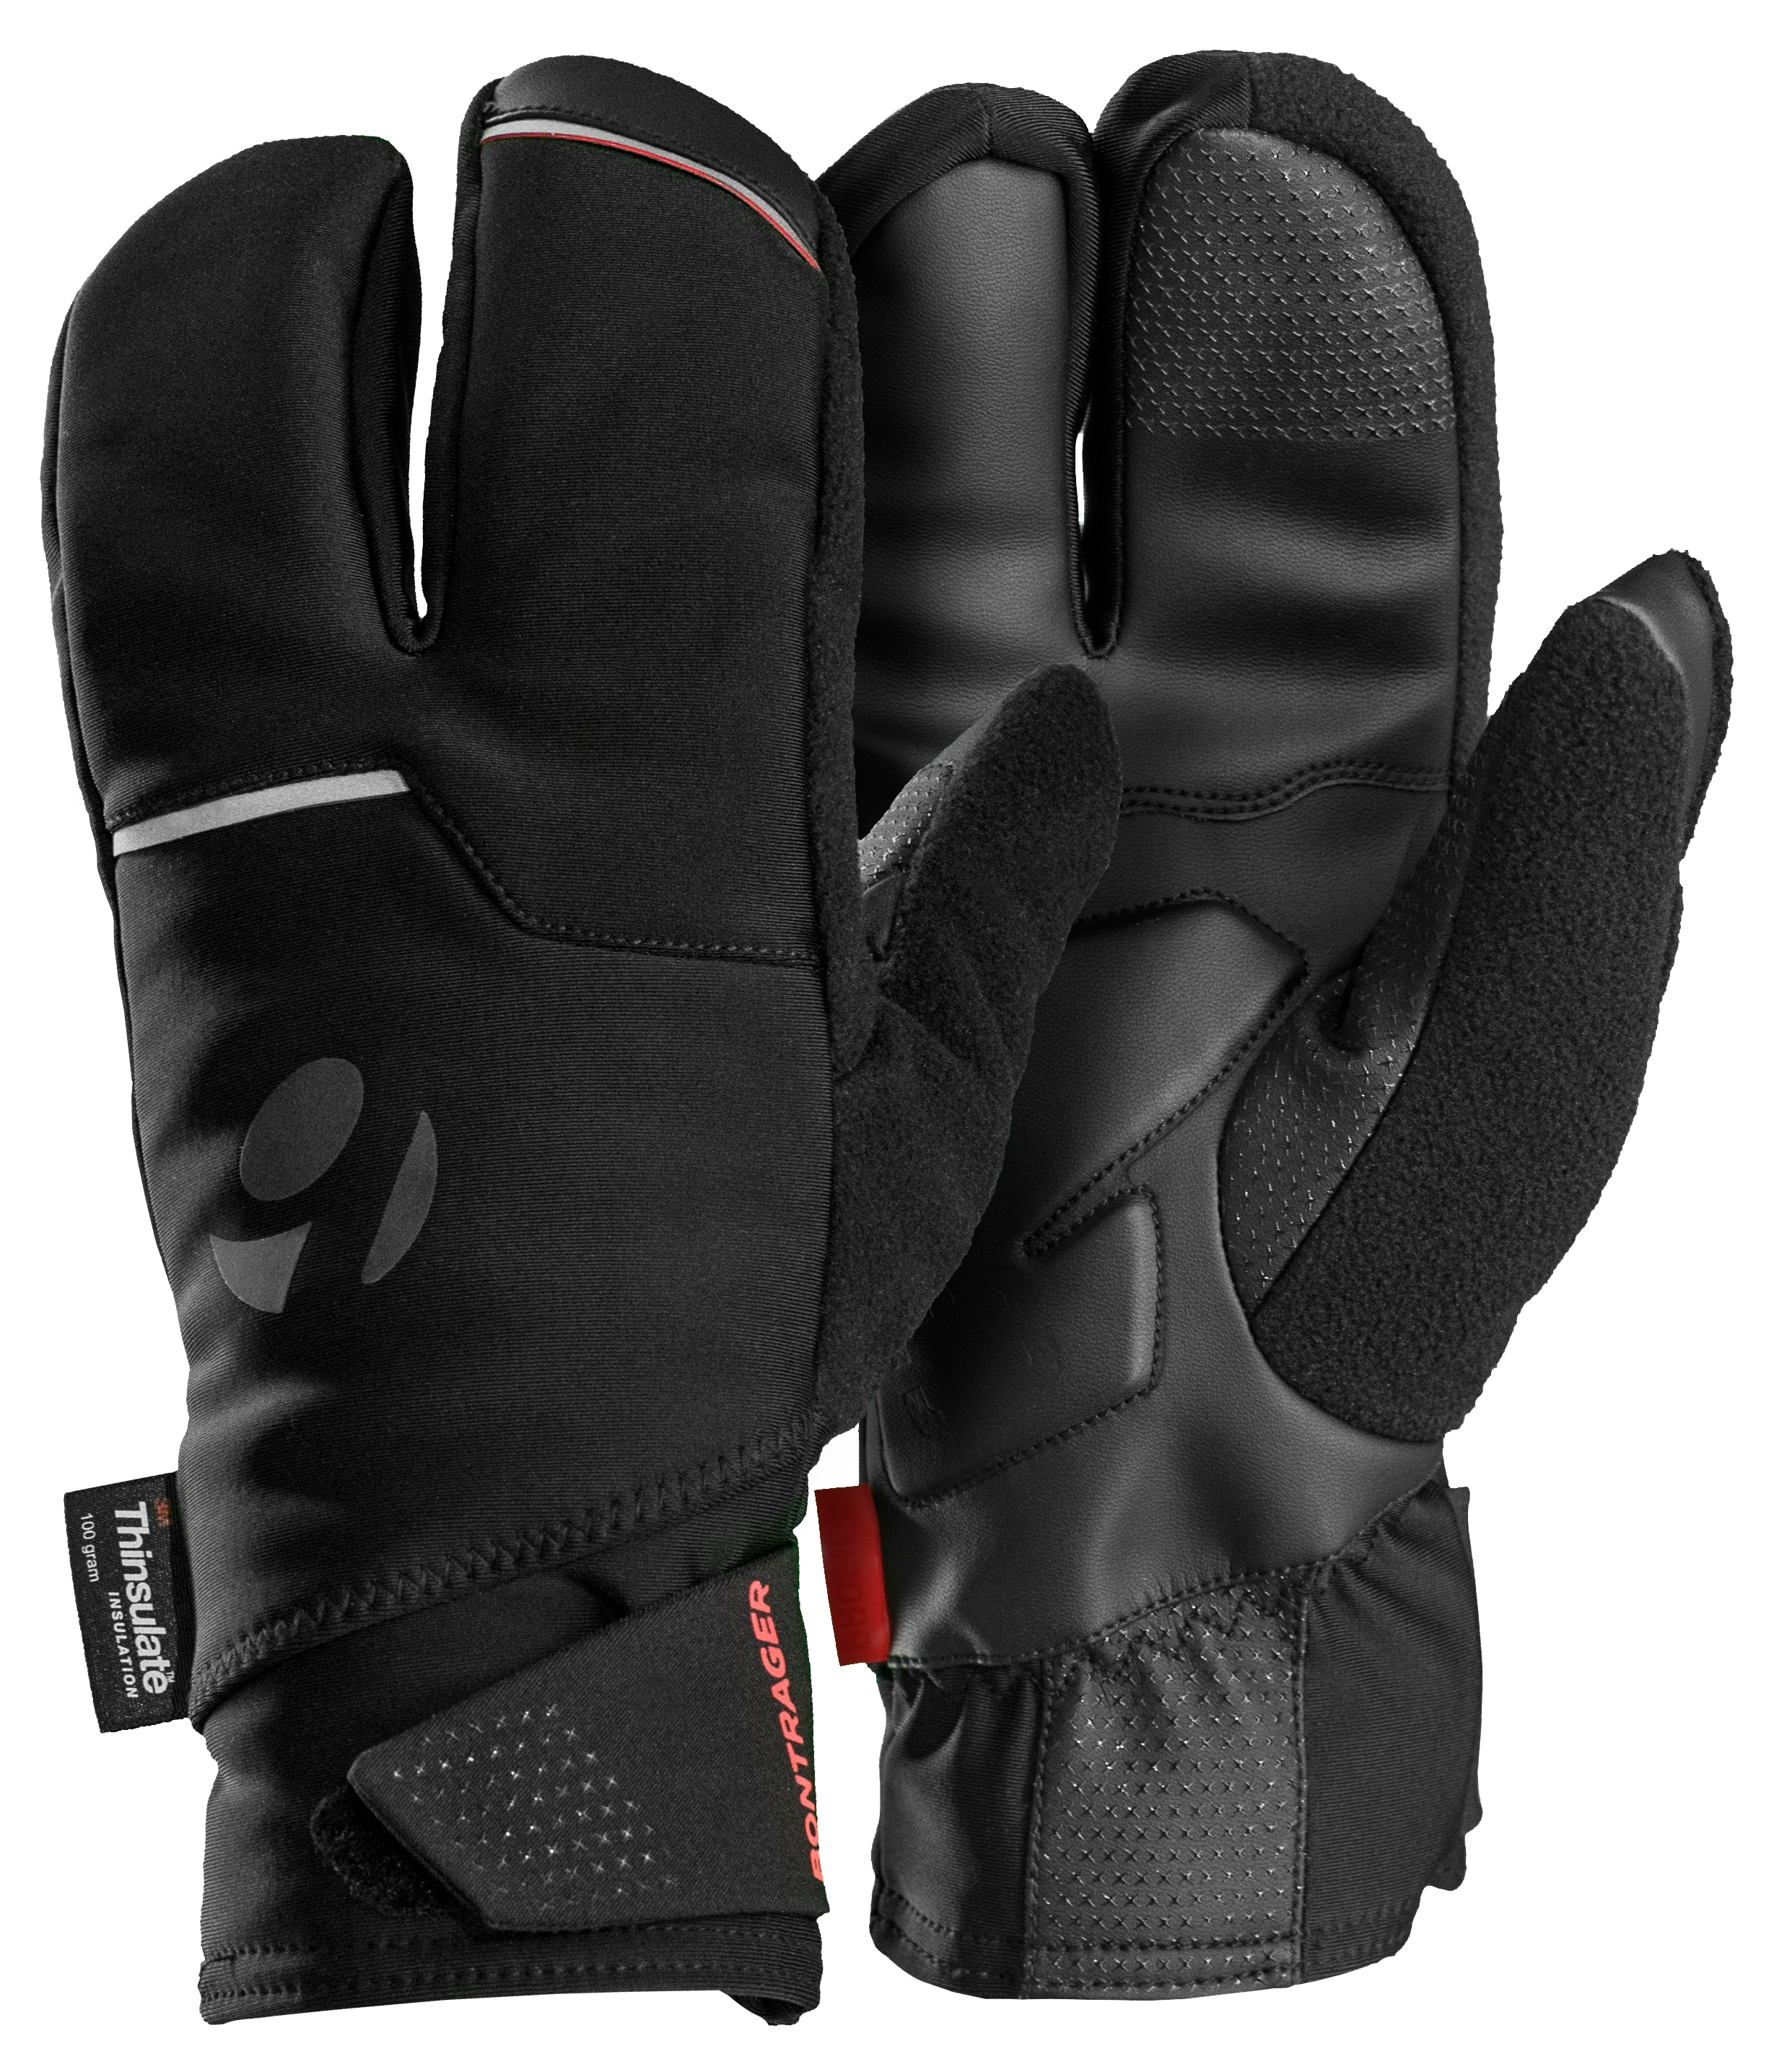 bontrager jfw winter cycling gloves